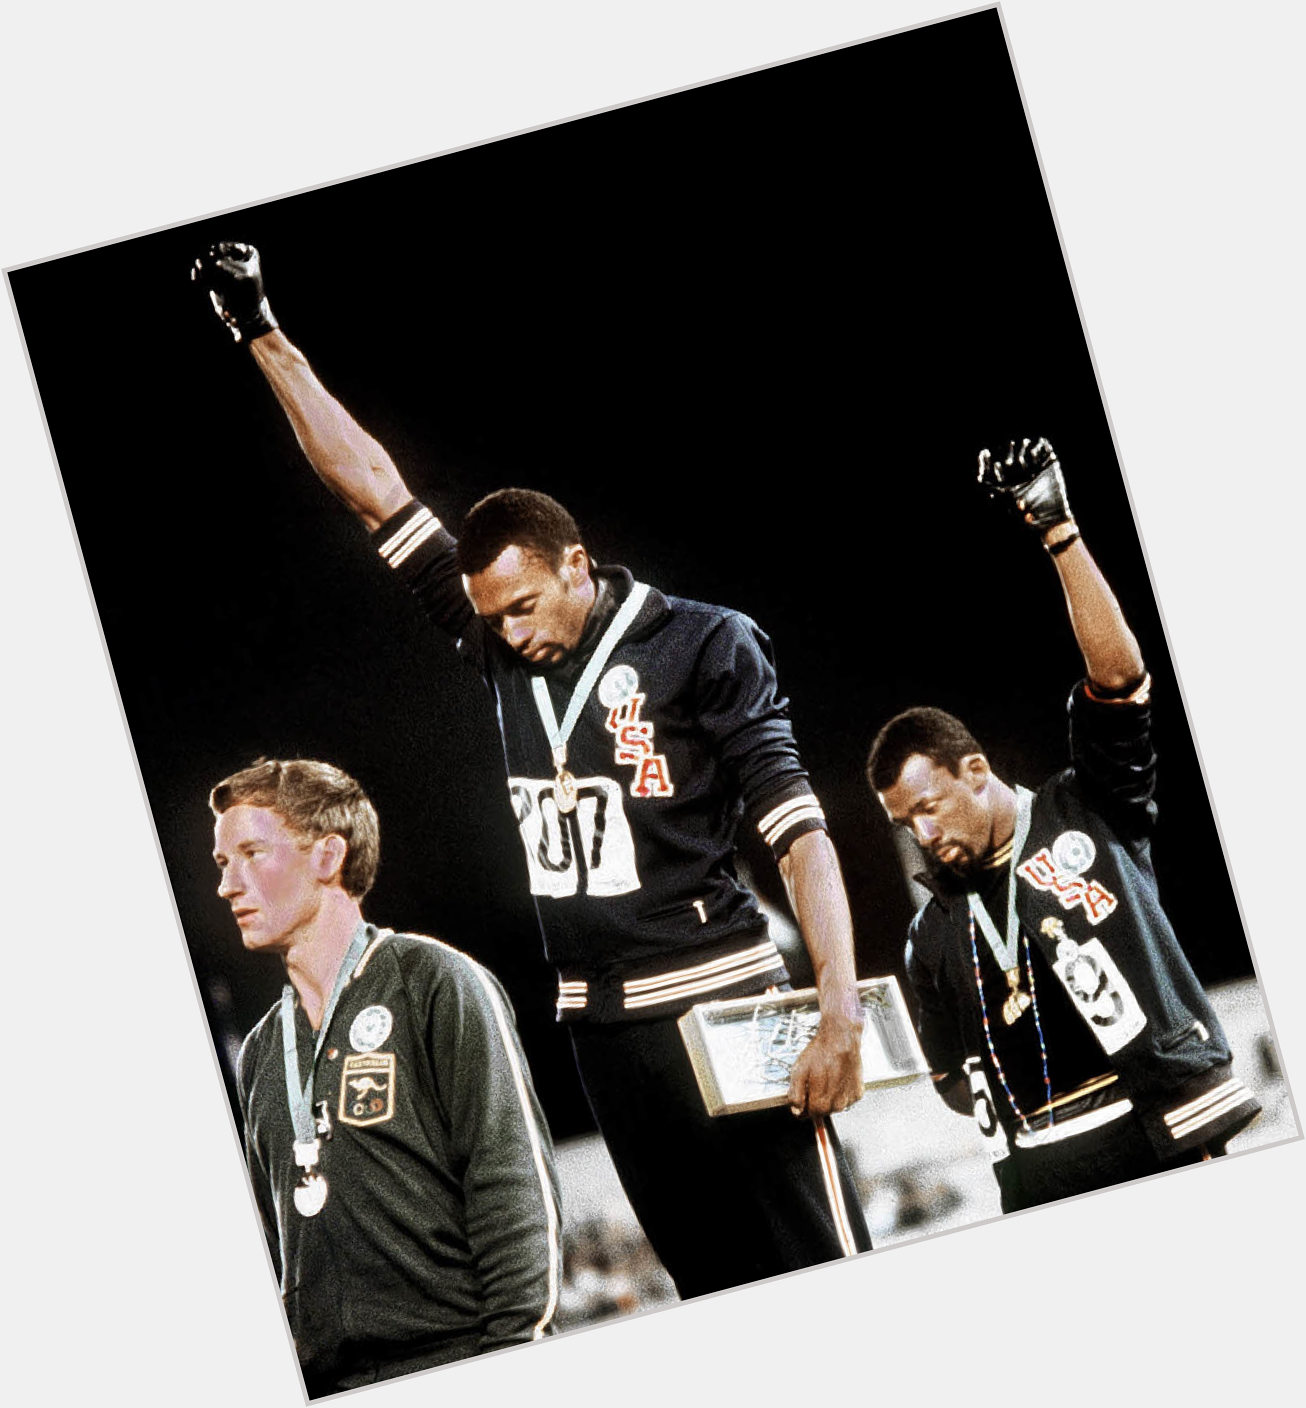 Using your platform for Freedom, Justice & Equality. Happy 70th Birthday John Carlos  